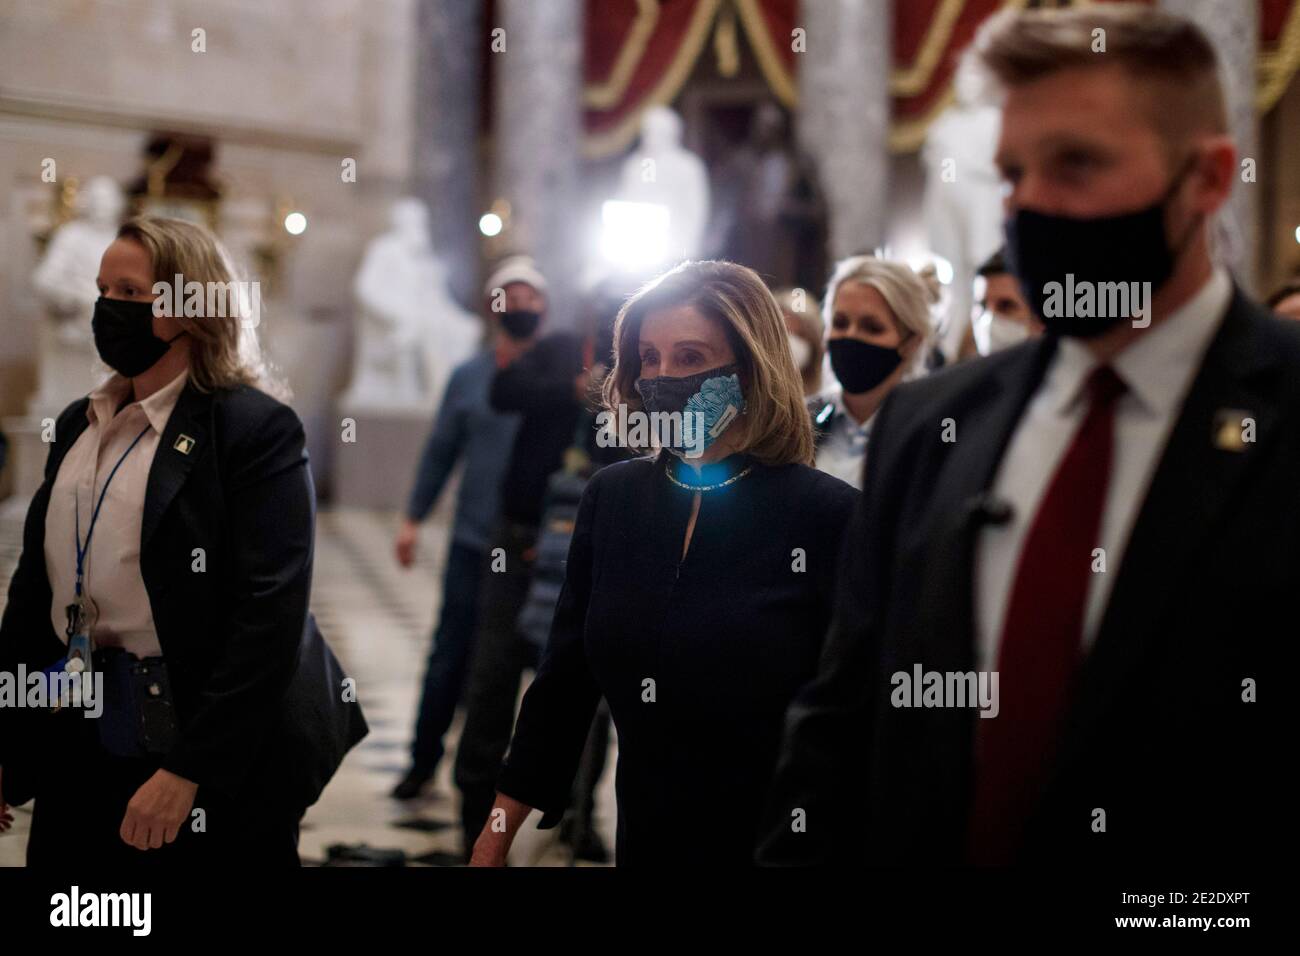 Washington, USA. 13th Jan, 2021. U.S. House Speaker Nancy Pelosi (C) wearing a protective mask walks through the hallways in Capitol Building in Washington, DC, the United States, Jan. 13, 2021. A majority of lawmakers in the U.S. House on Wednesday voted for impeaching President Donald Trump over 'incitement of insurrection,' making him the first president to be impeached twice. Credit: Ting Shen/Xinhua/Alamy Live News Stock Photo